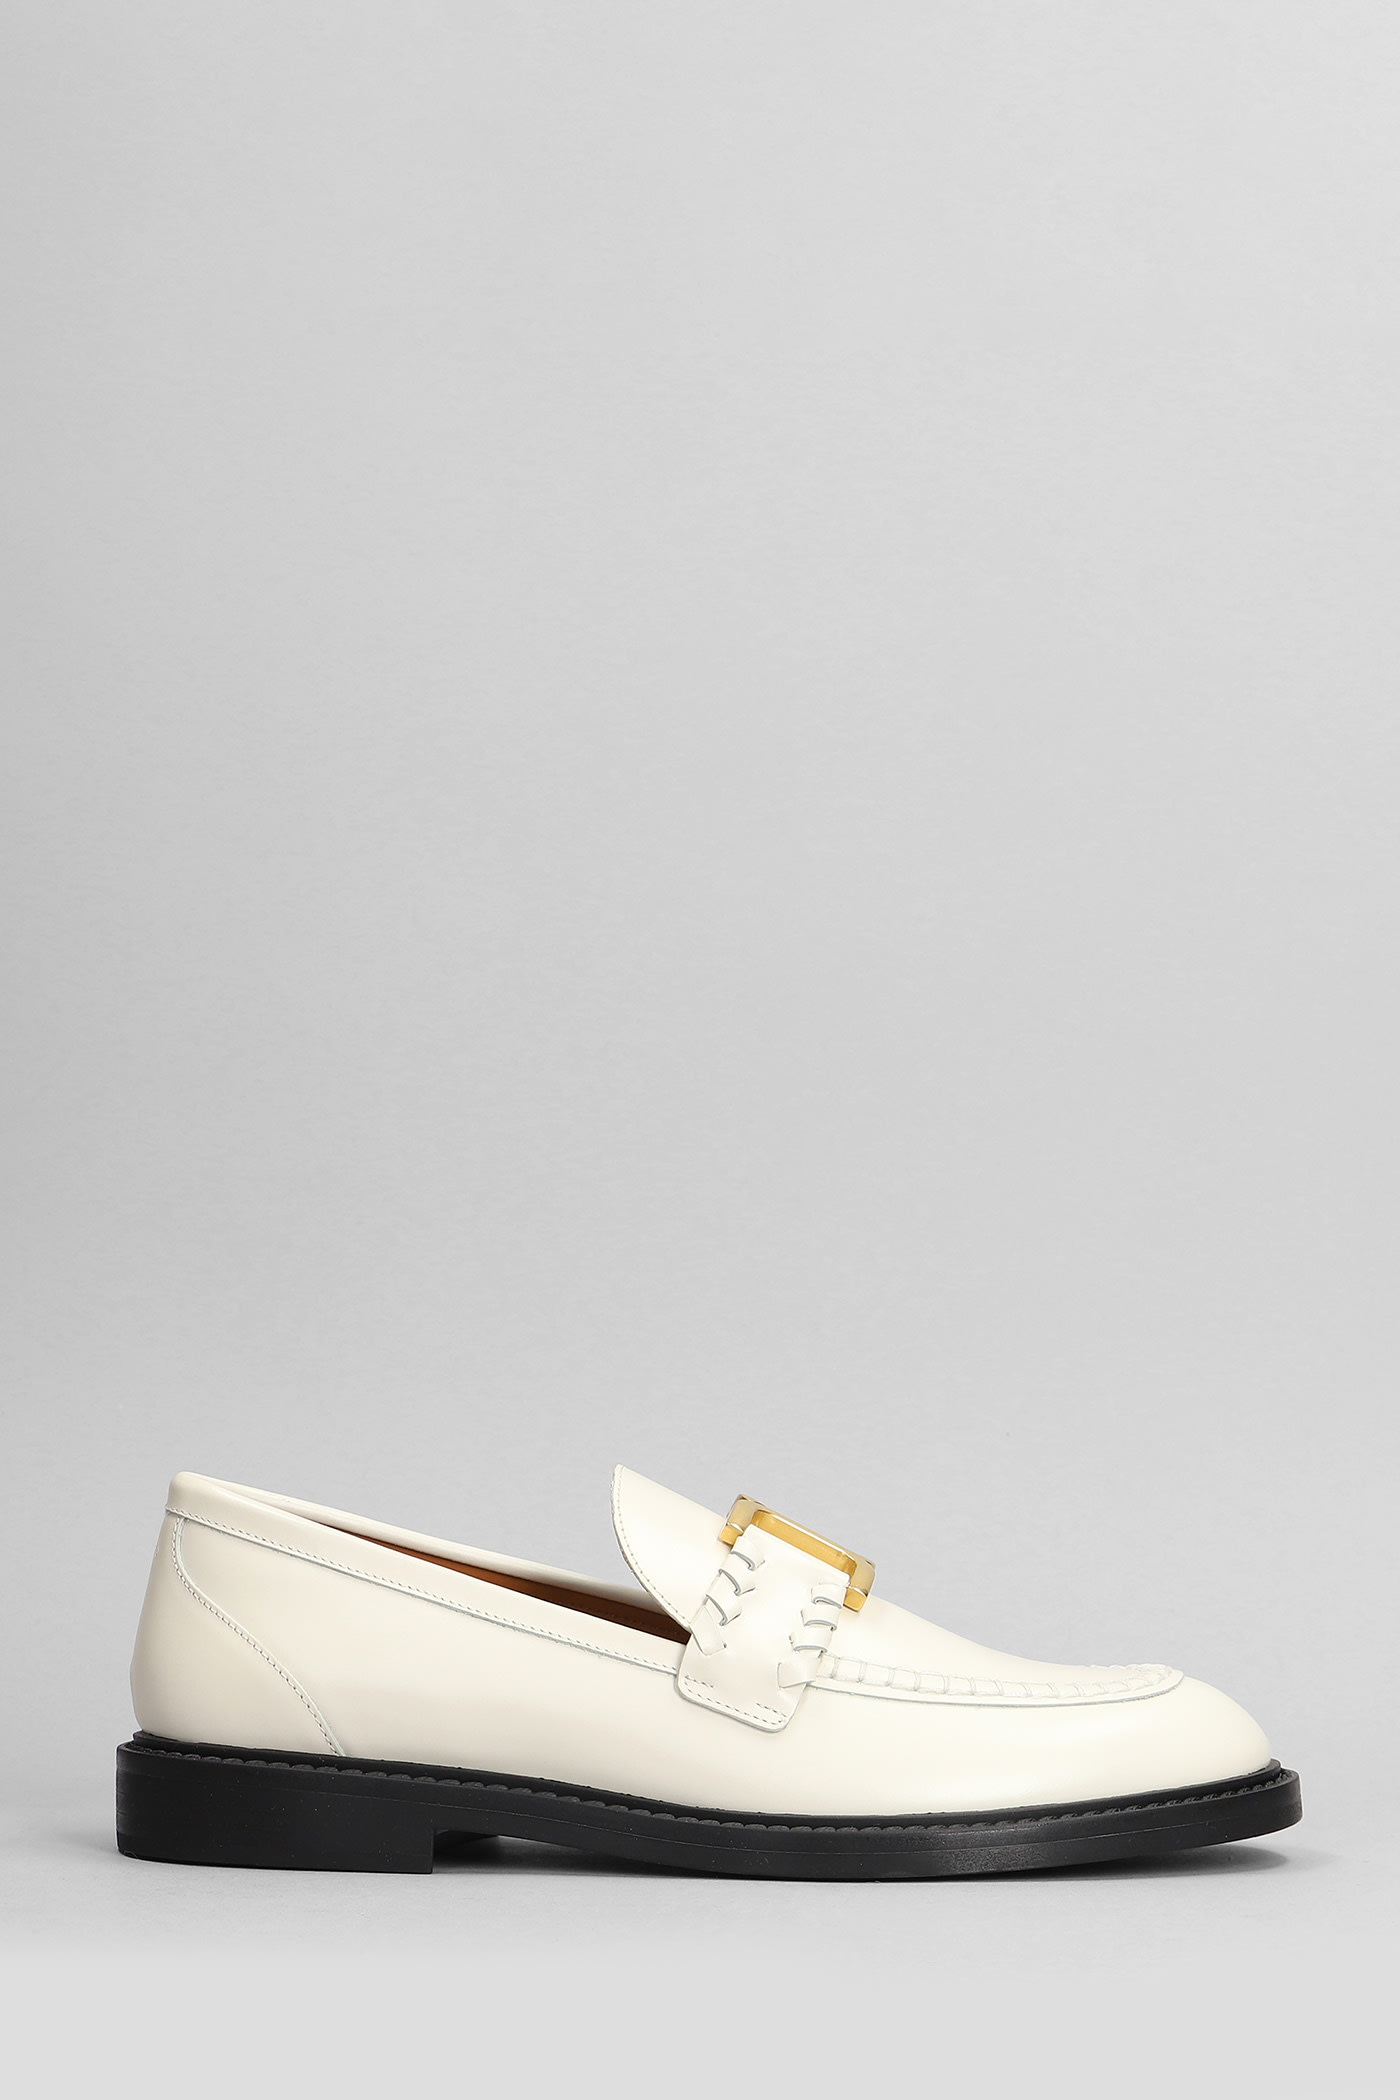 Chloé Mercie Loafers In White Leather